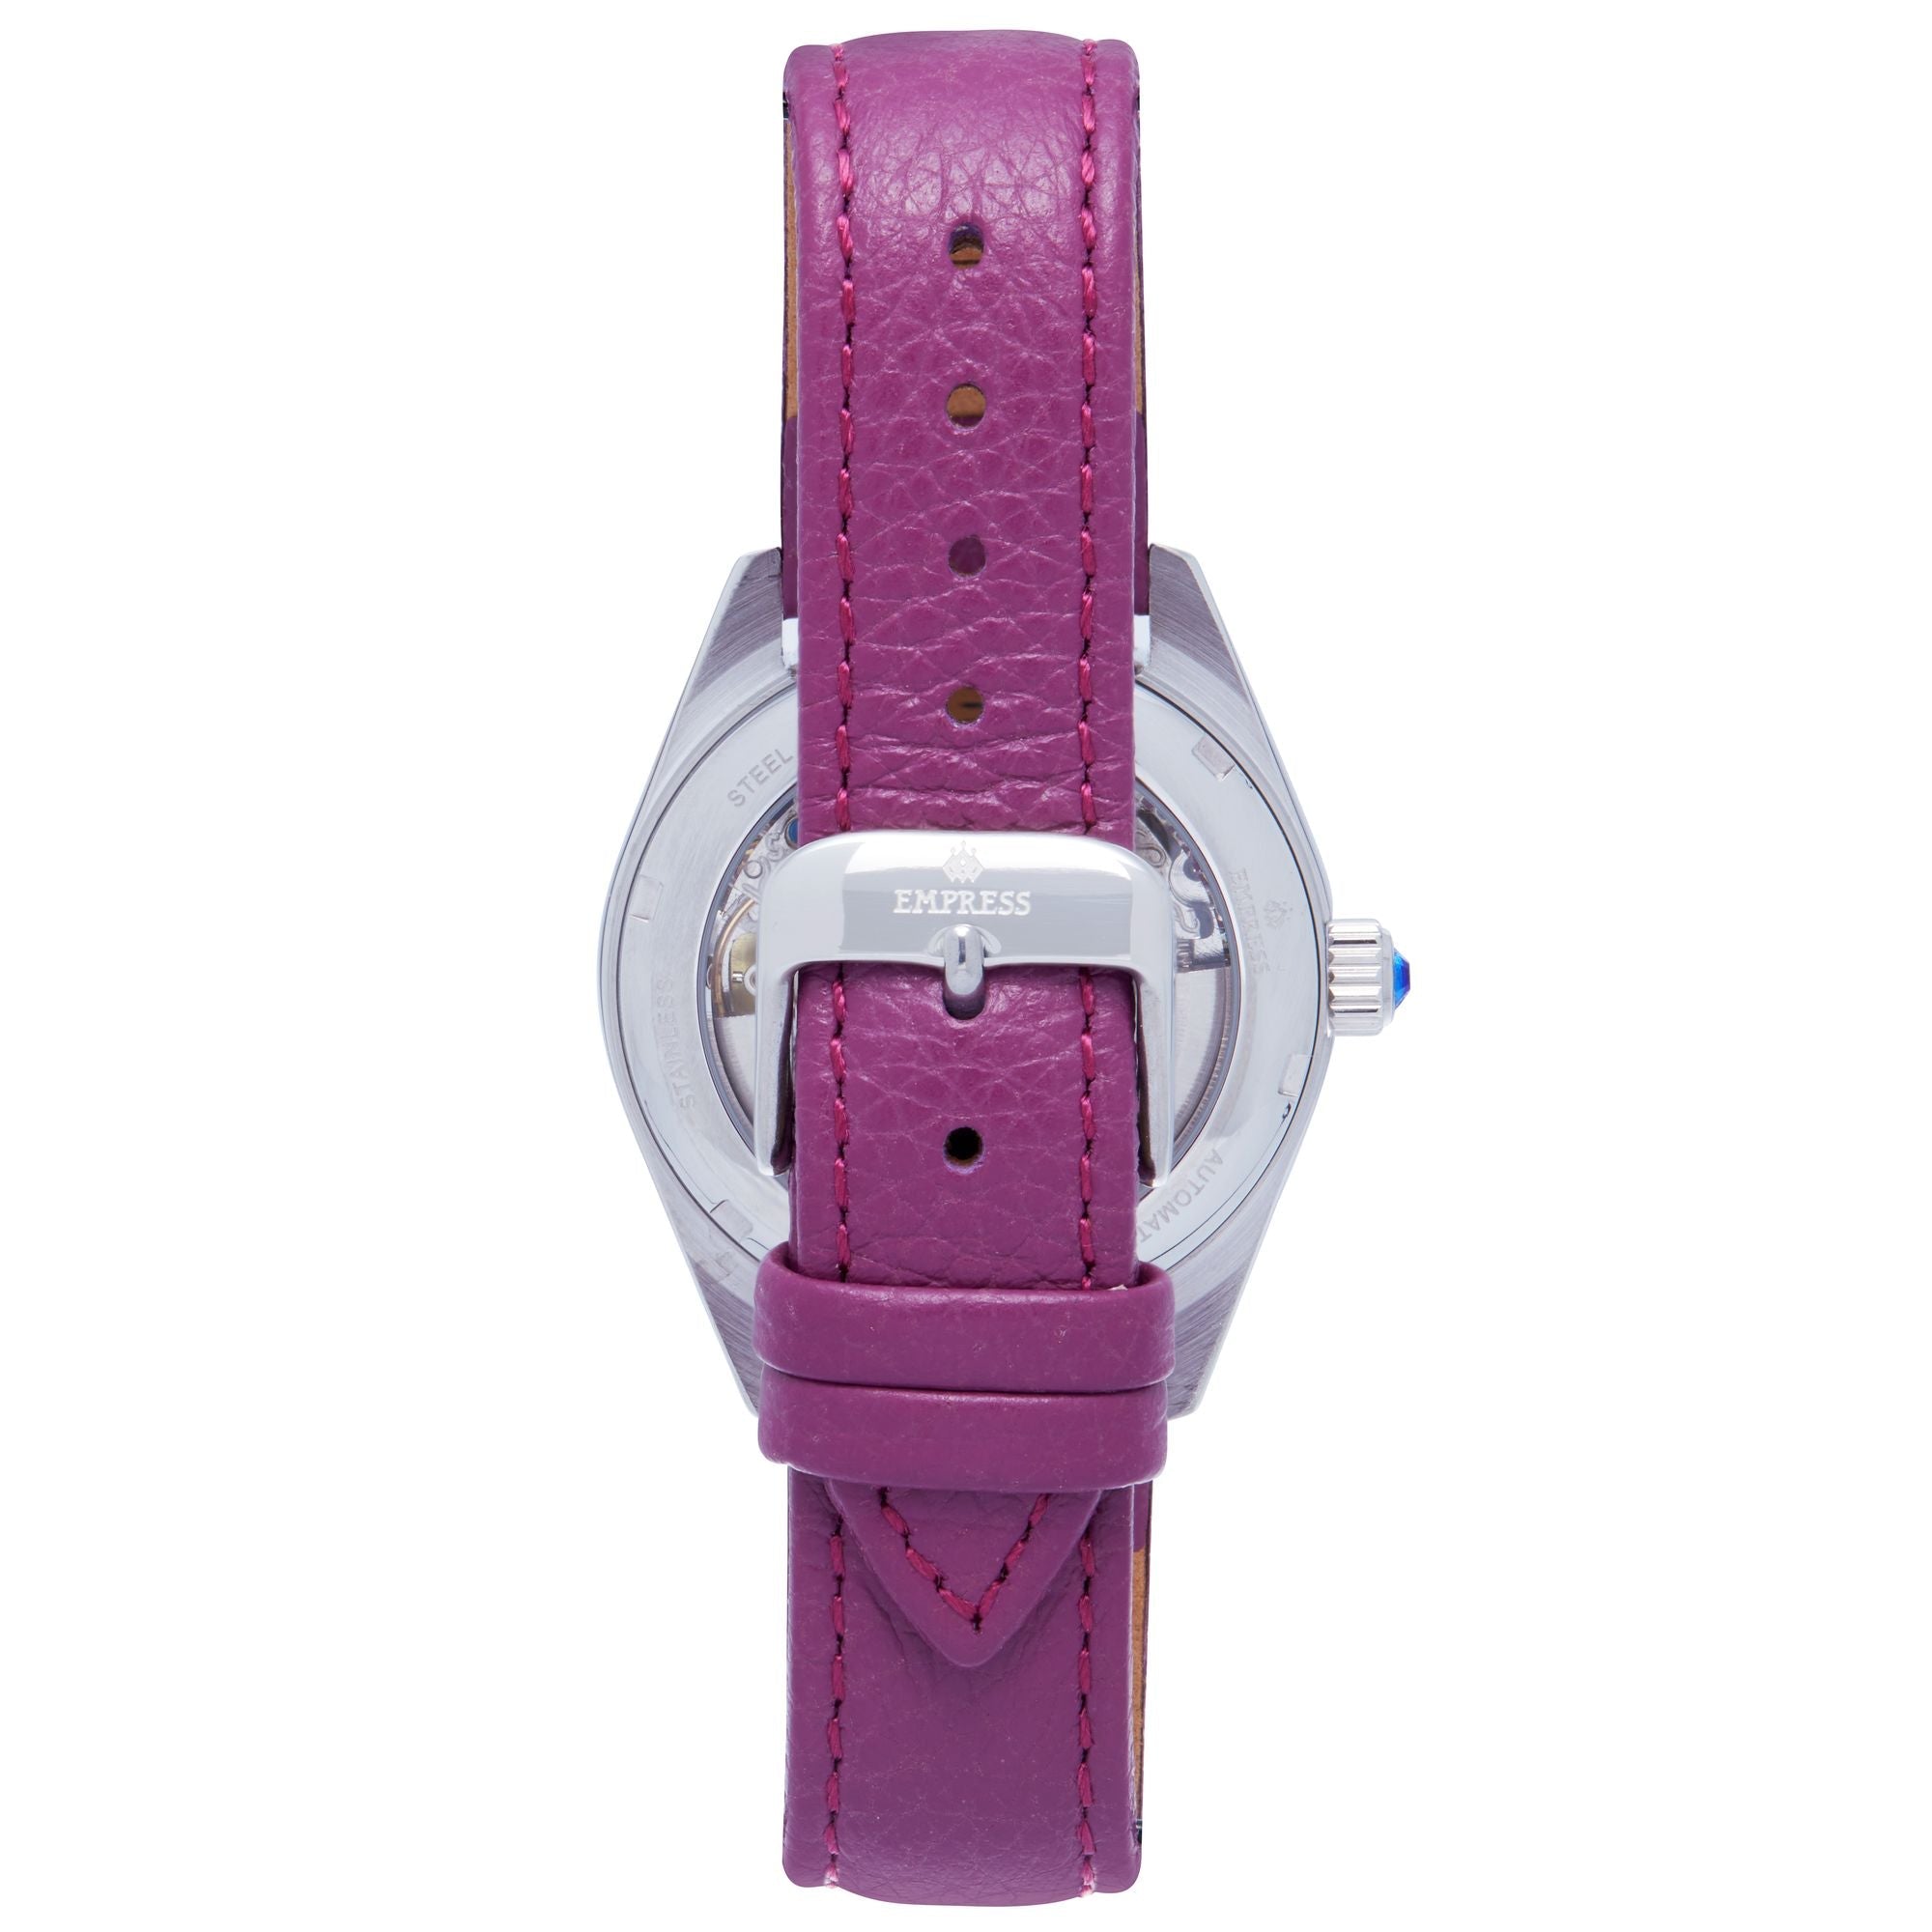 Empress Magnolia Automatic MOP Skeleton Dial Leather-Band Watch - Purple/Silver - EMPEM3605